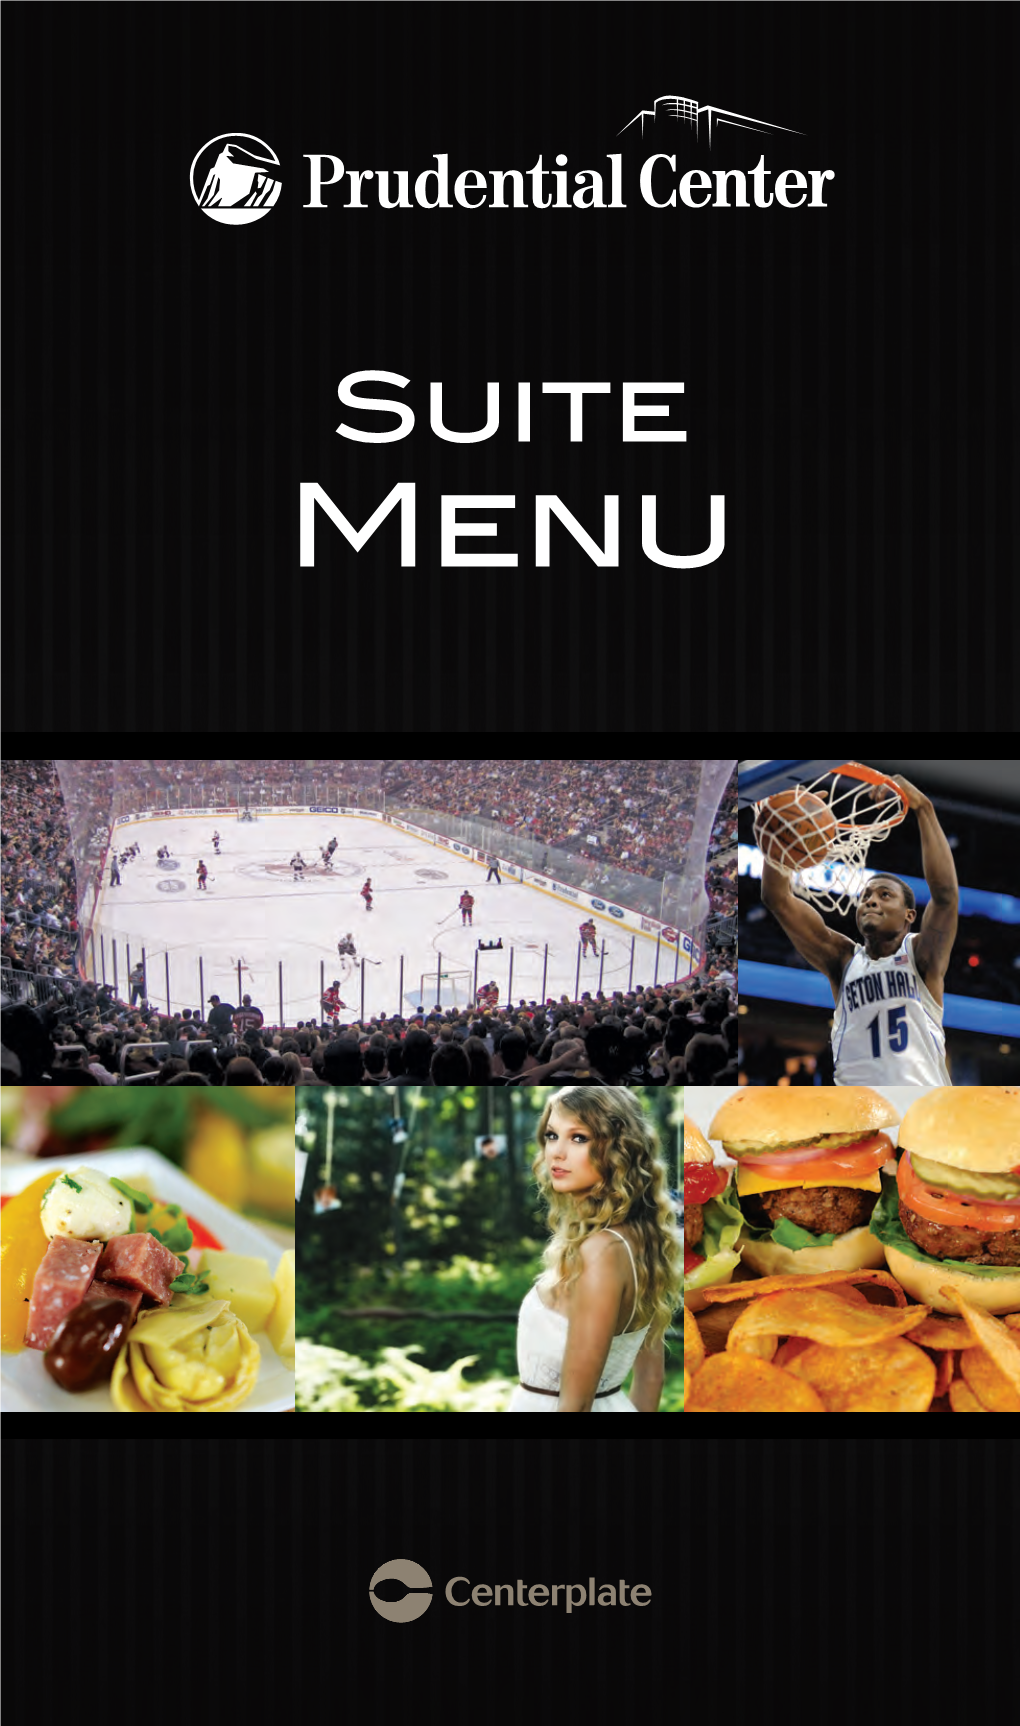 2011/2012 Suites Menu for the Prudential Center